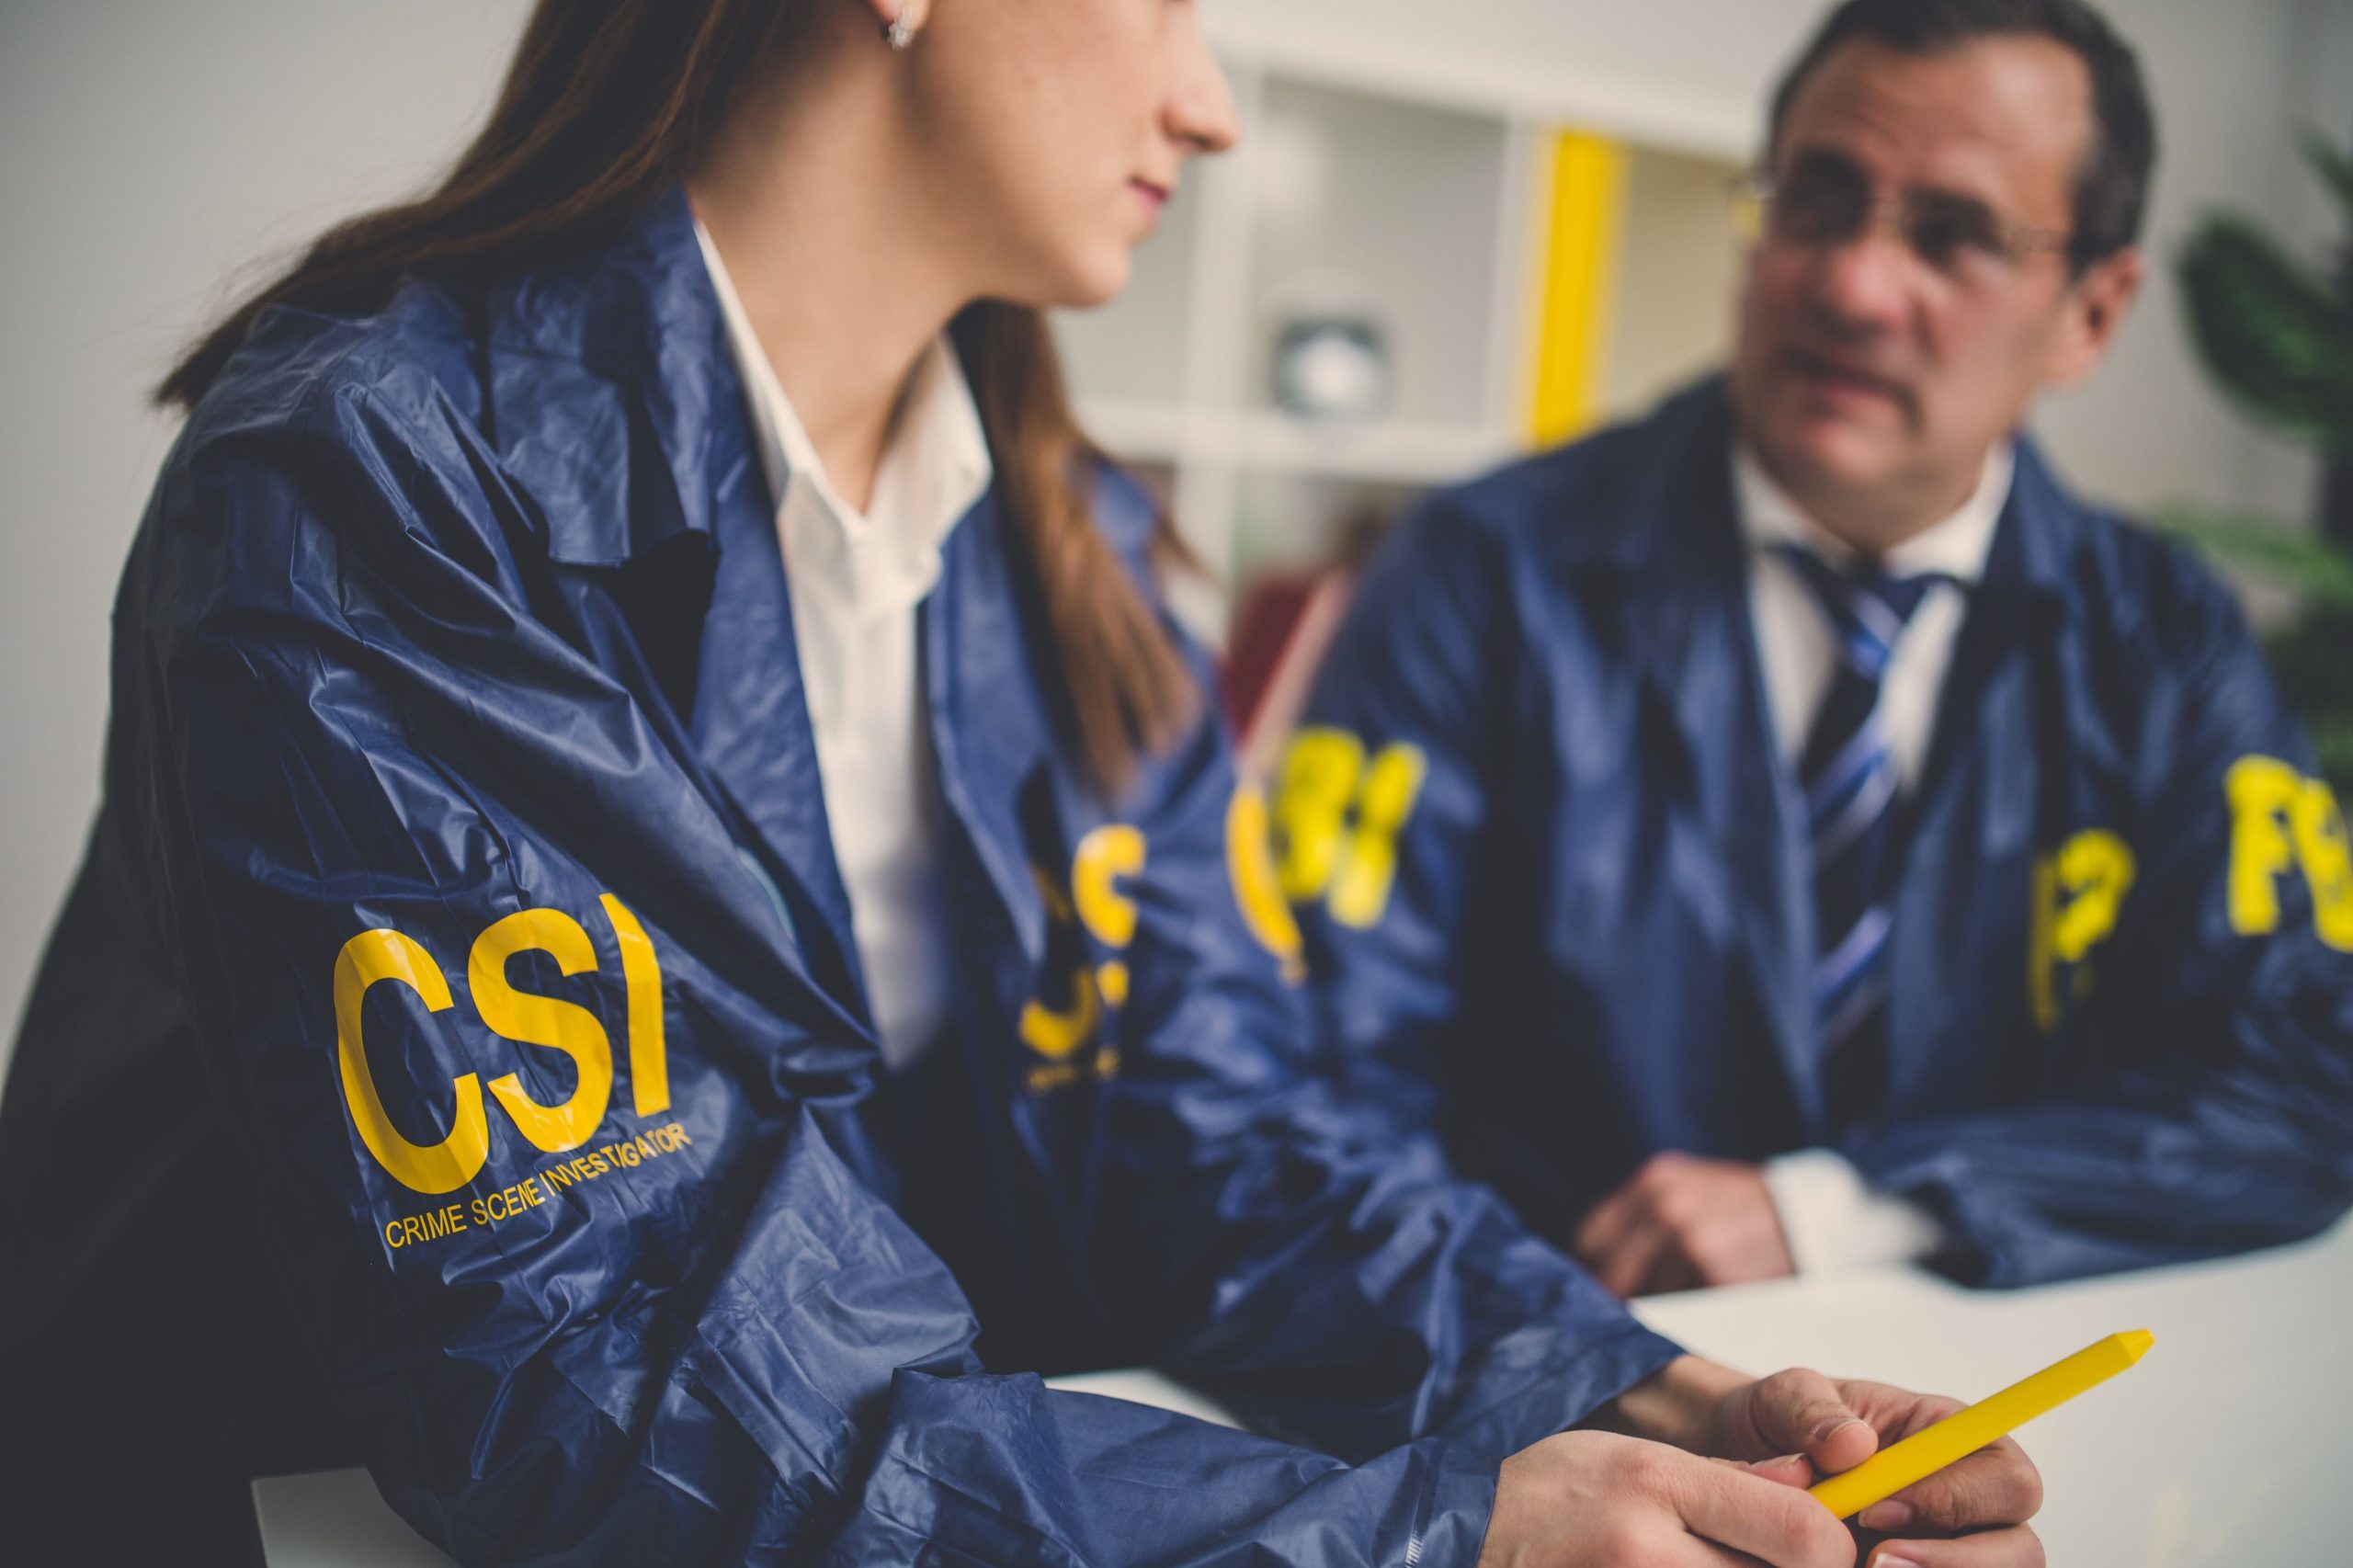 Detective and criminal investigator careers are interesting and often ...